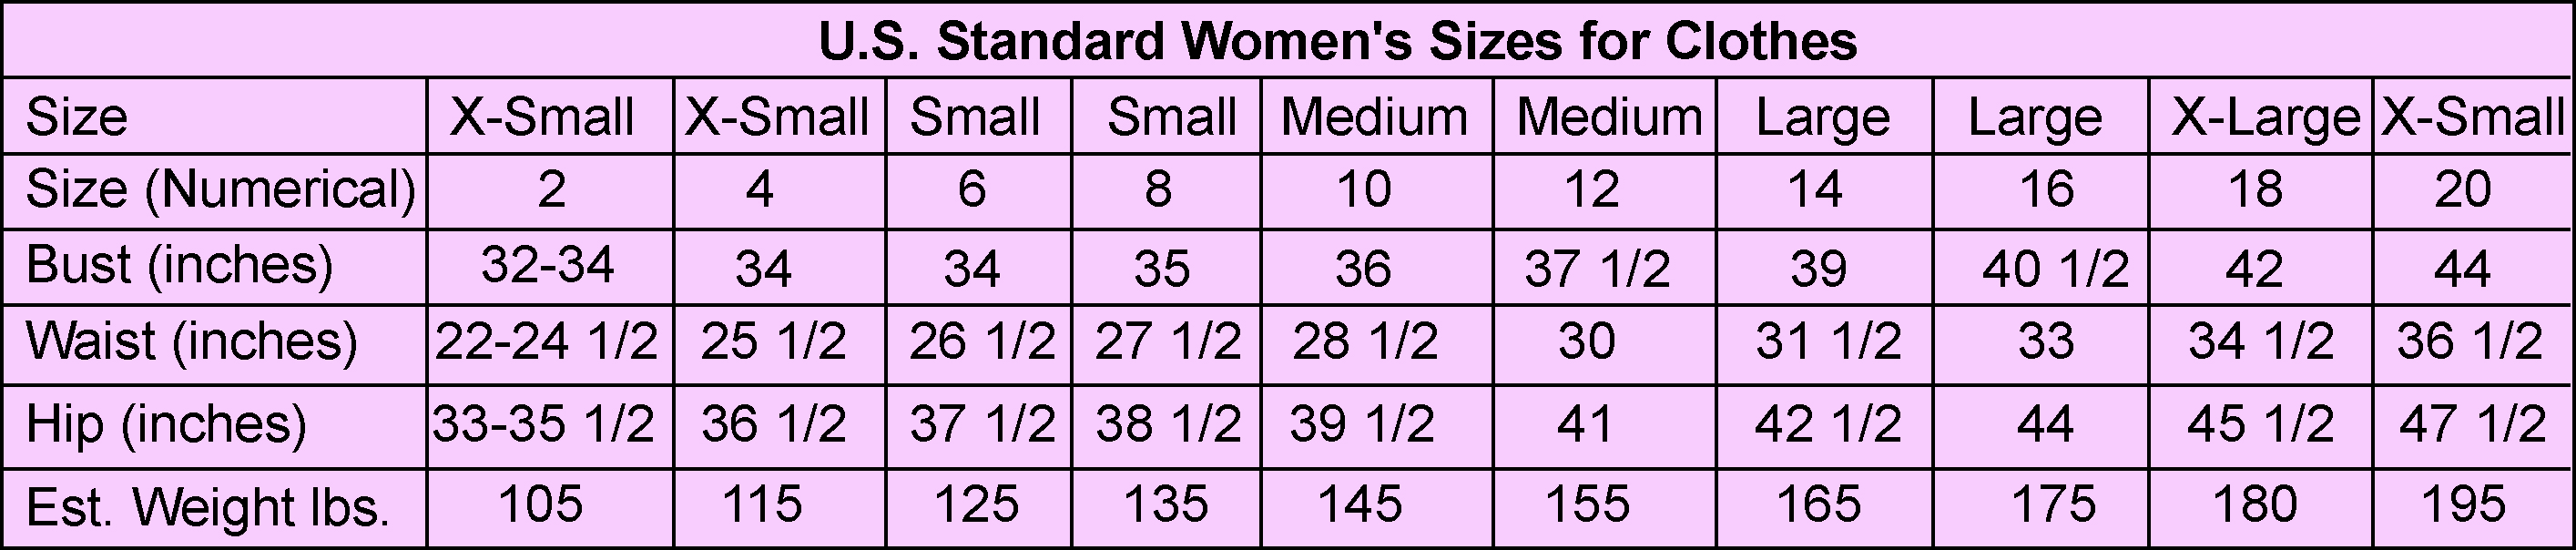 U.S. Women's standard sizes for clothes